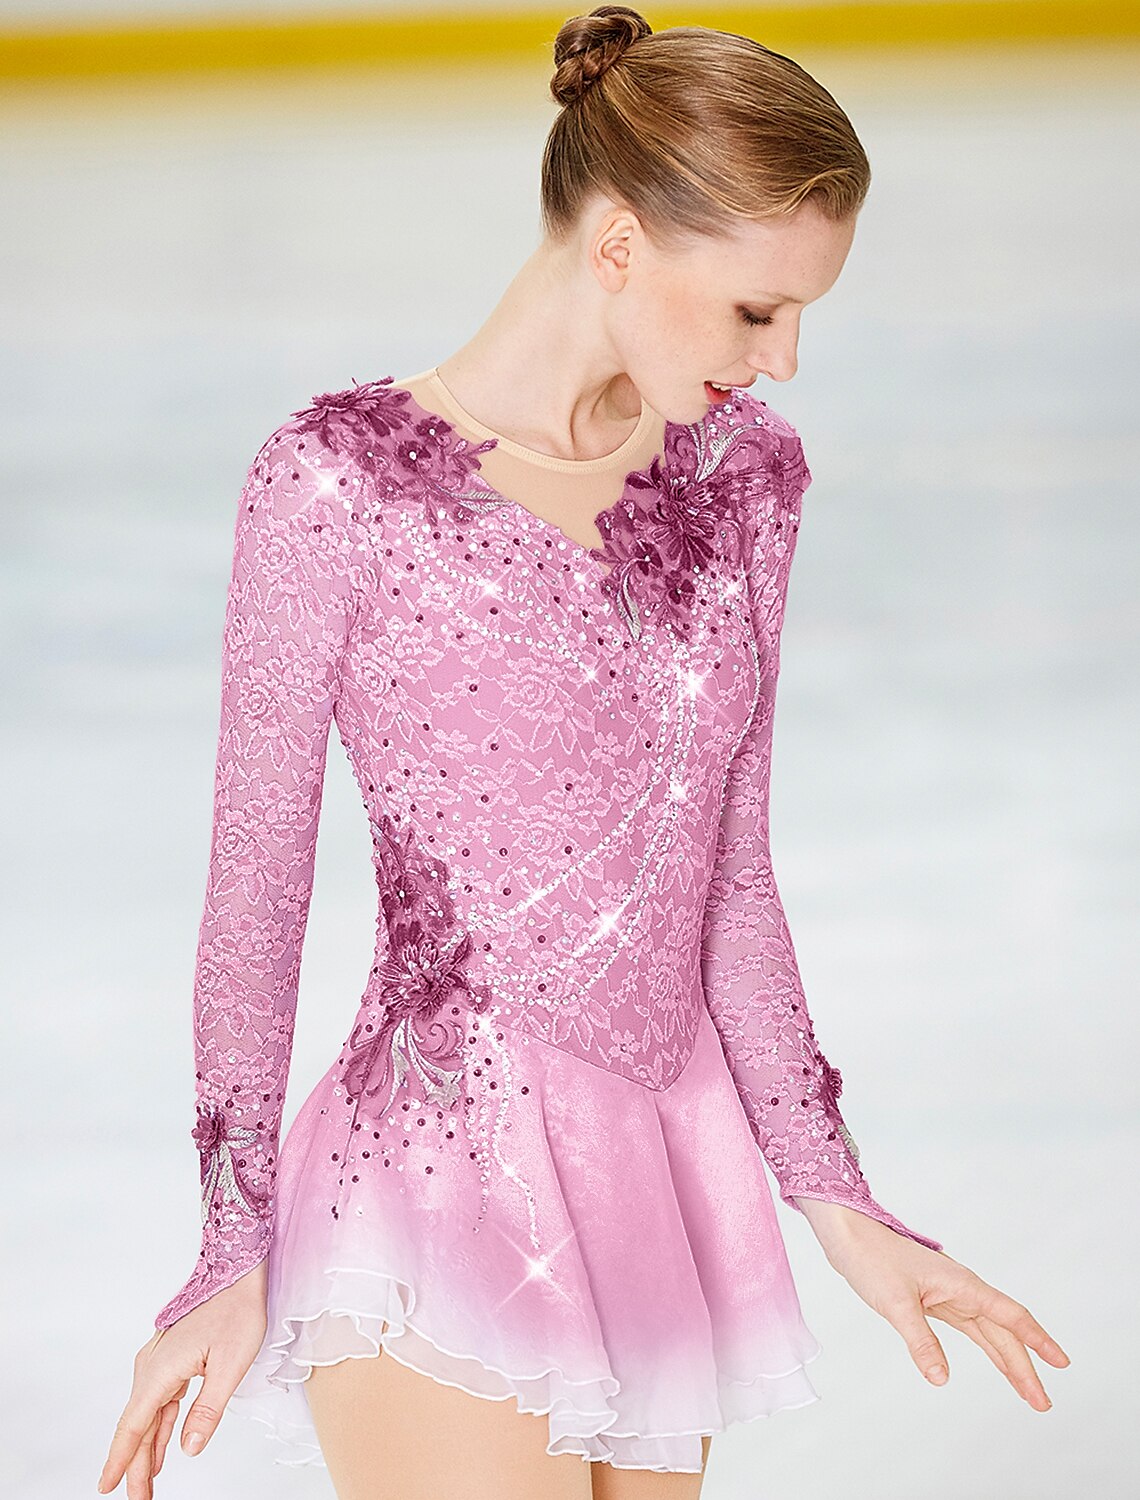 New Girls Women Ice Figure Skating Dress  For Competition Pink training handmade 